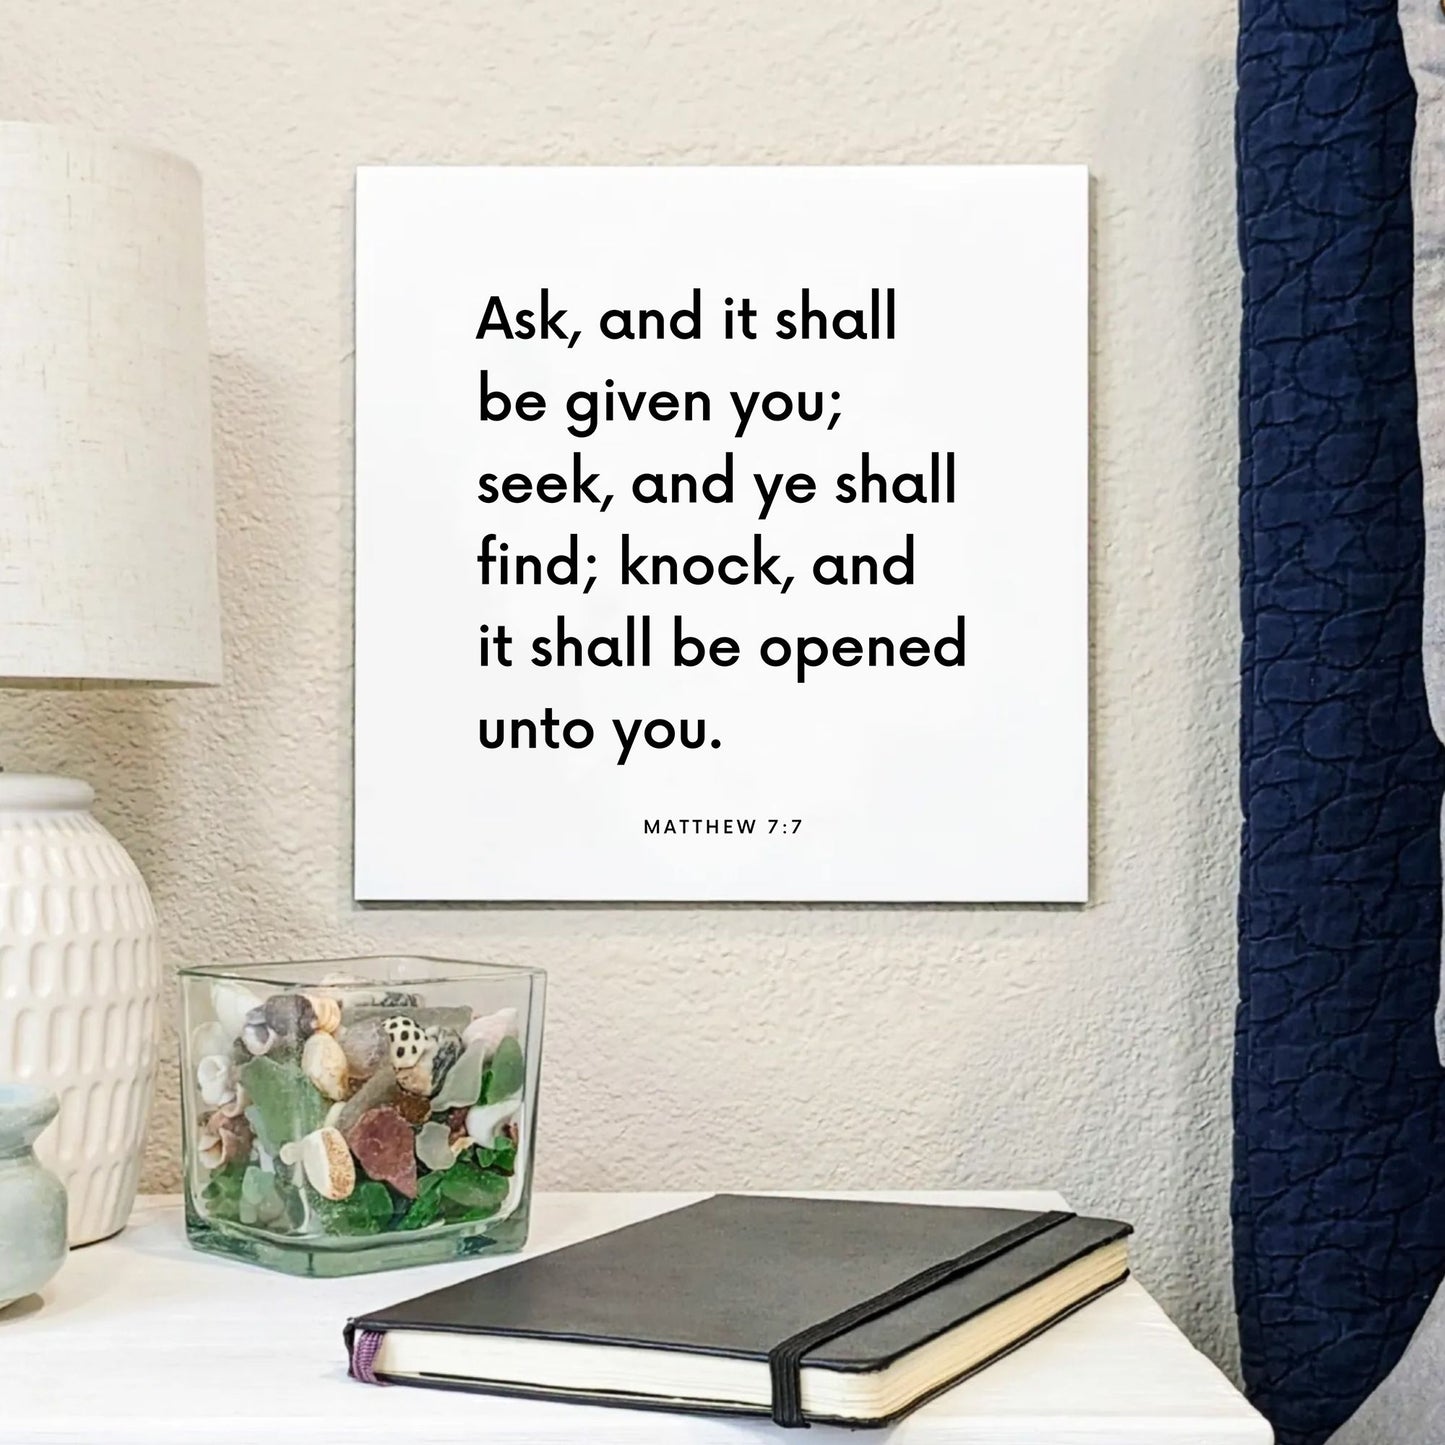 Bedside mouting of the scripture tile for Matthew 7:7 - "Ask, and it shall be given you; seek, and ye shall find"